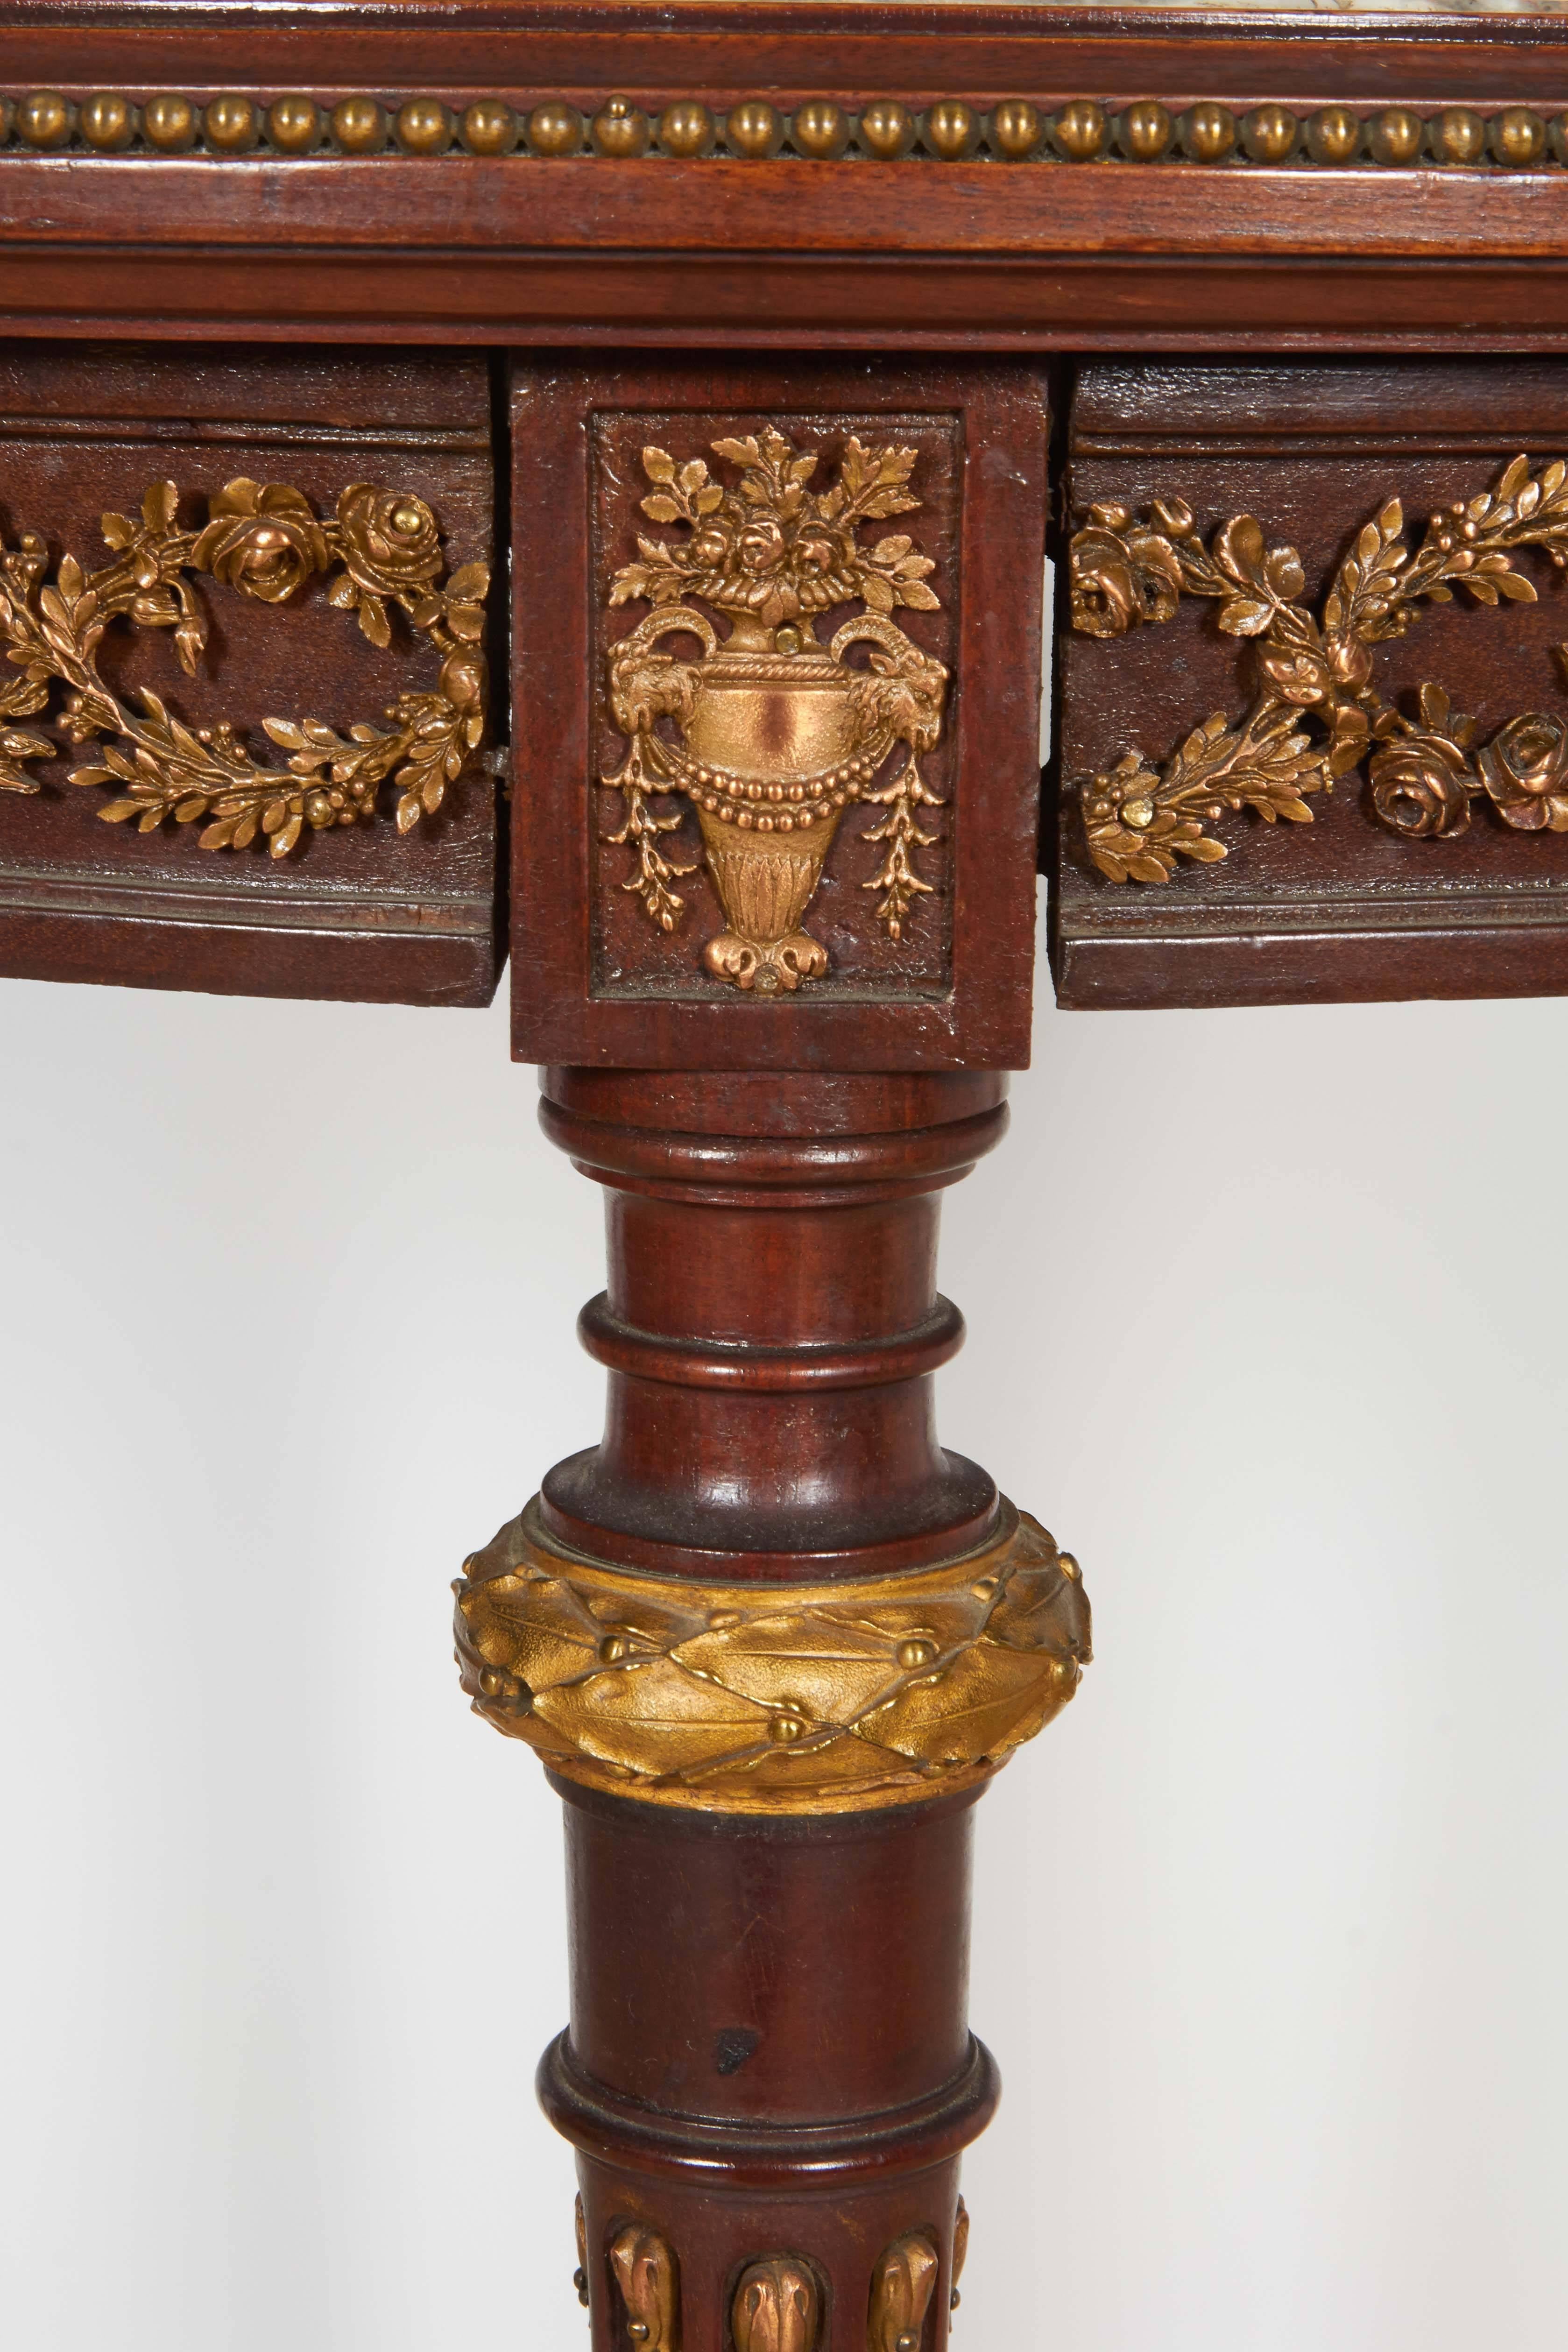 19th Century French Bronze-Mounted Mahogany Marble-Top Gueridon Table Attributed to Linke